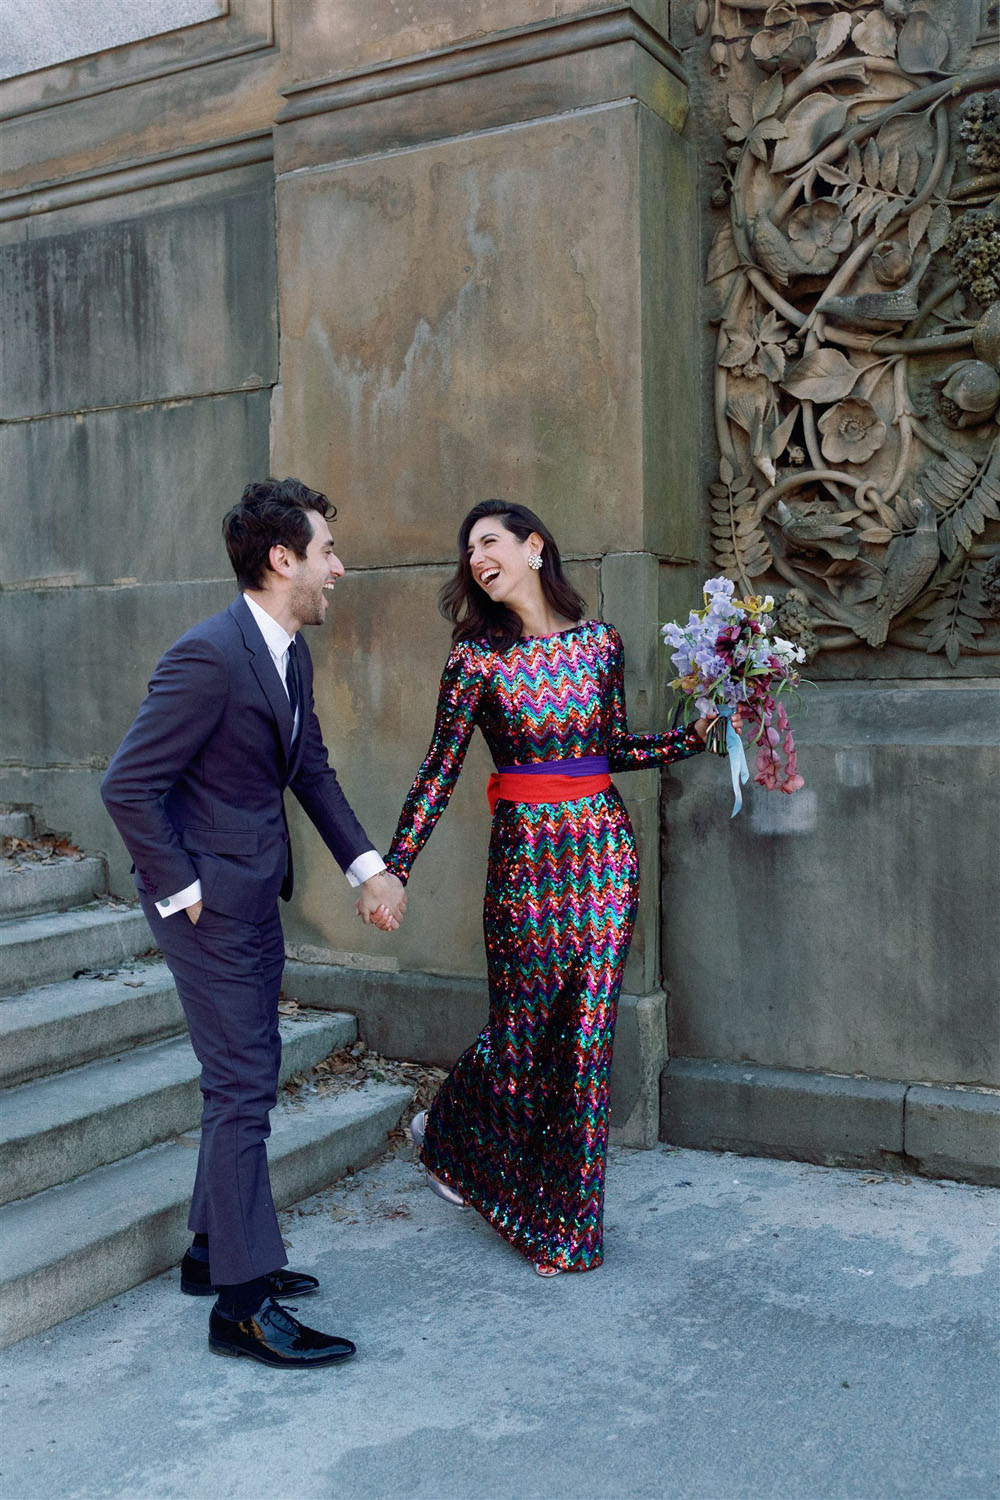 Tips for stylish, creative elopement photos